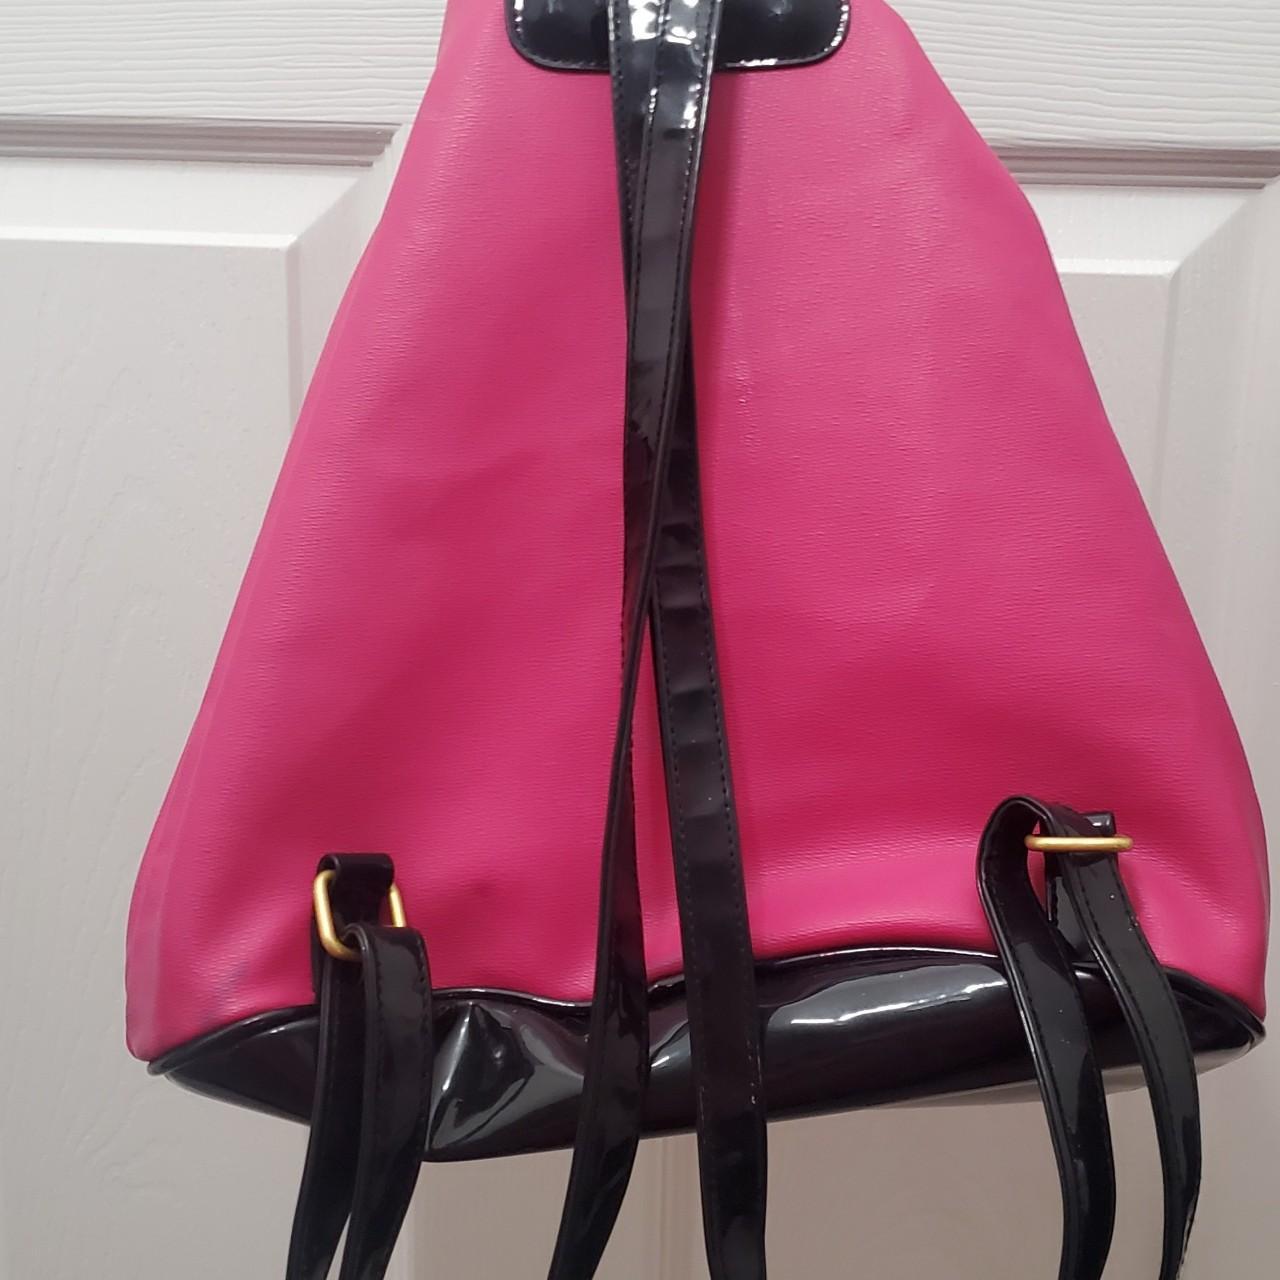 Juicy Couture backpack Like new pink leather with - Depop